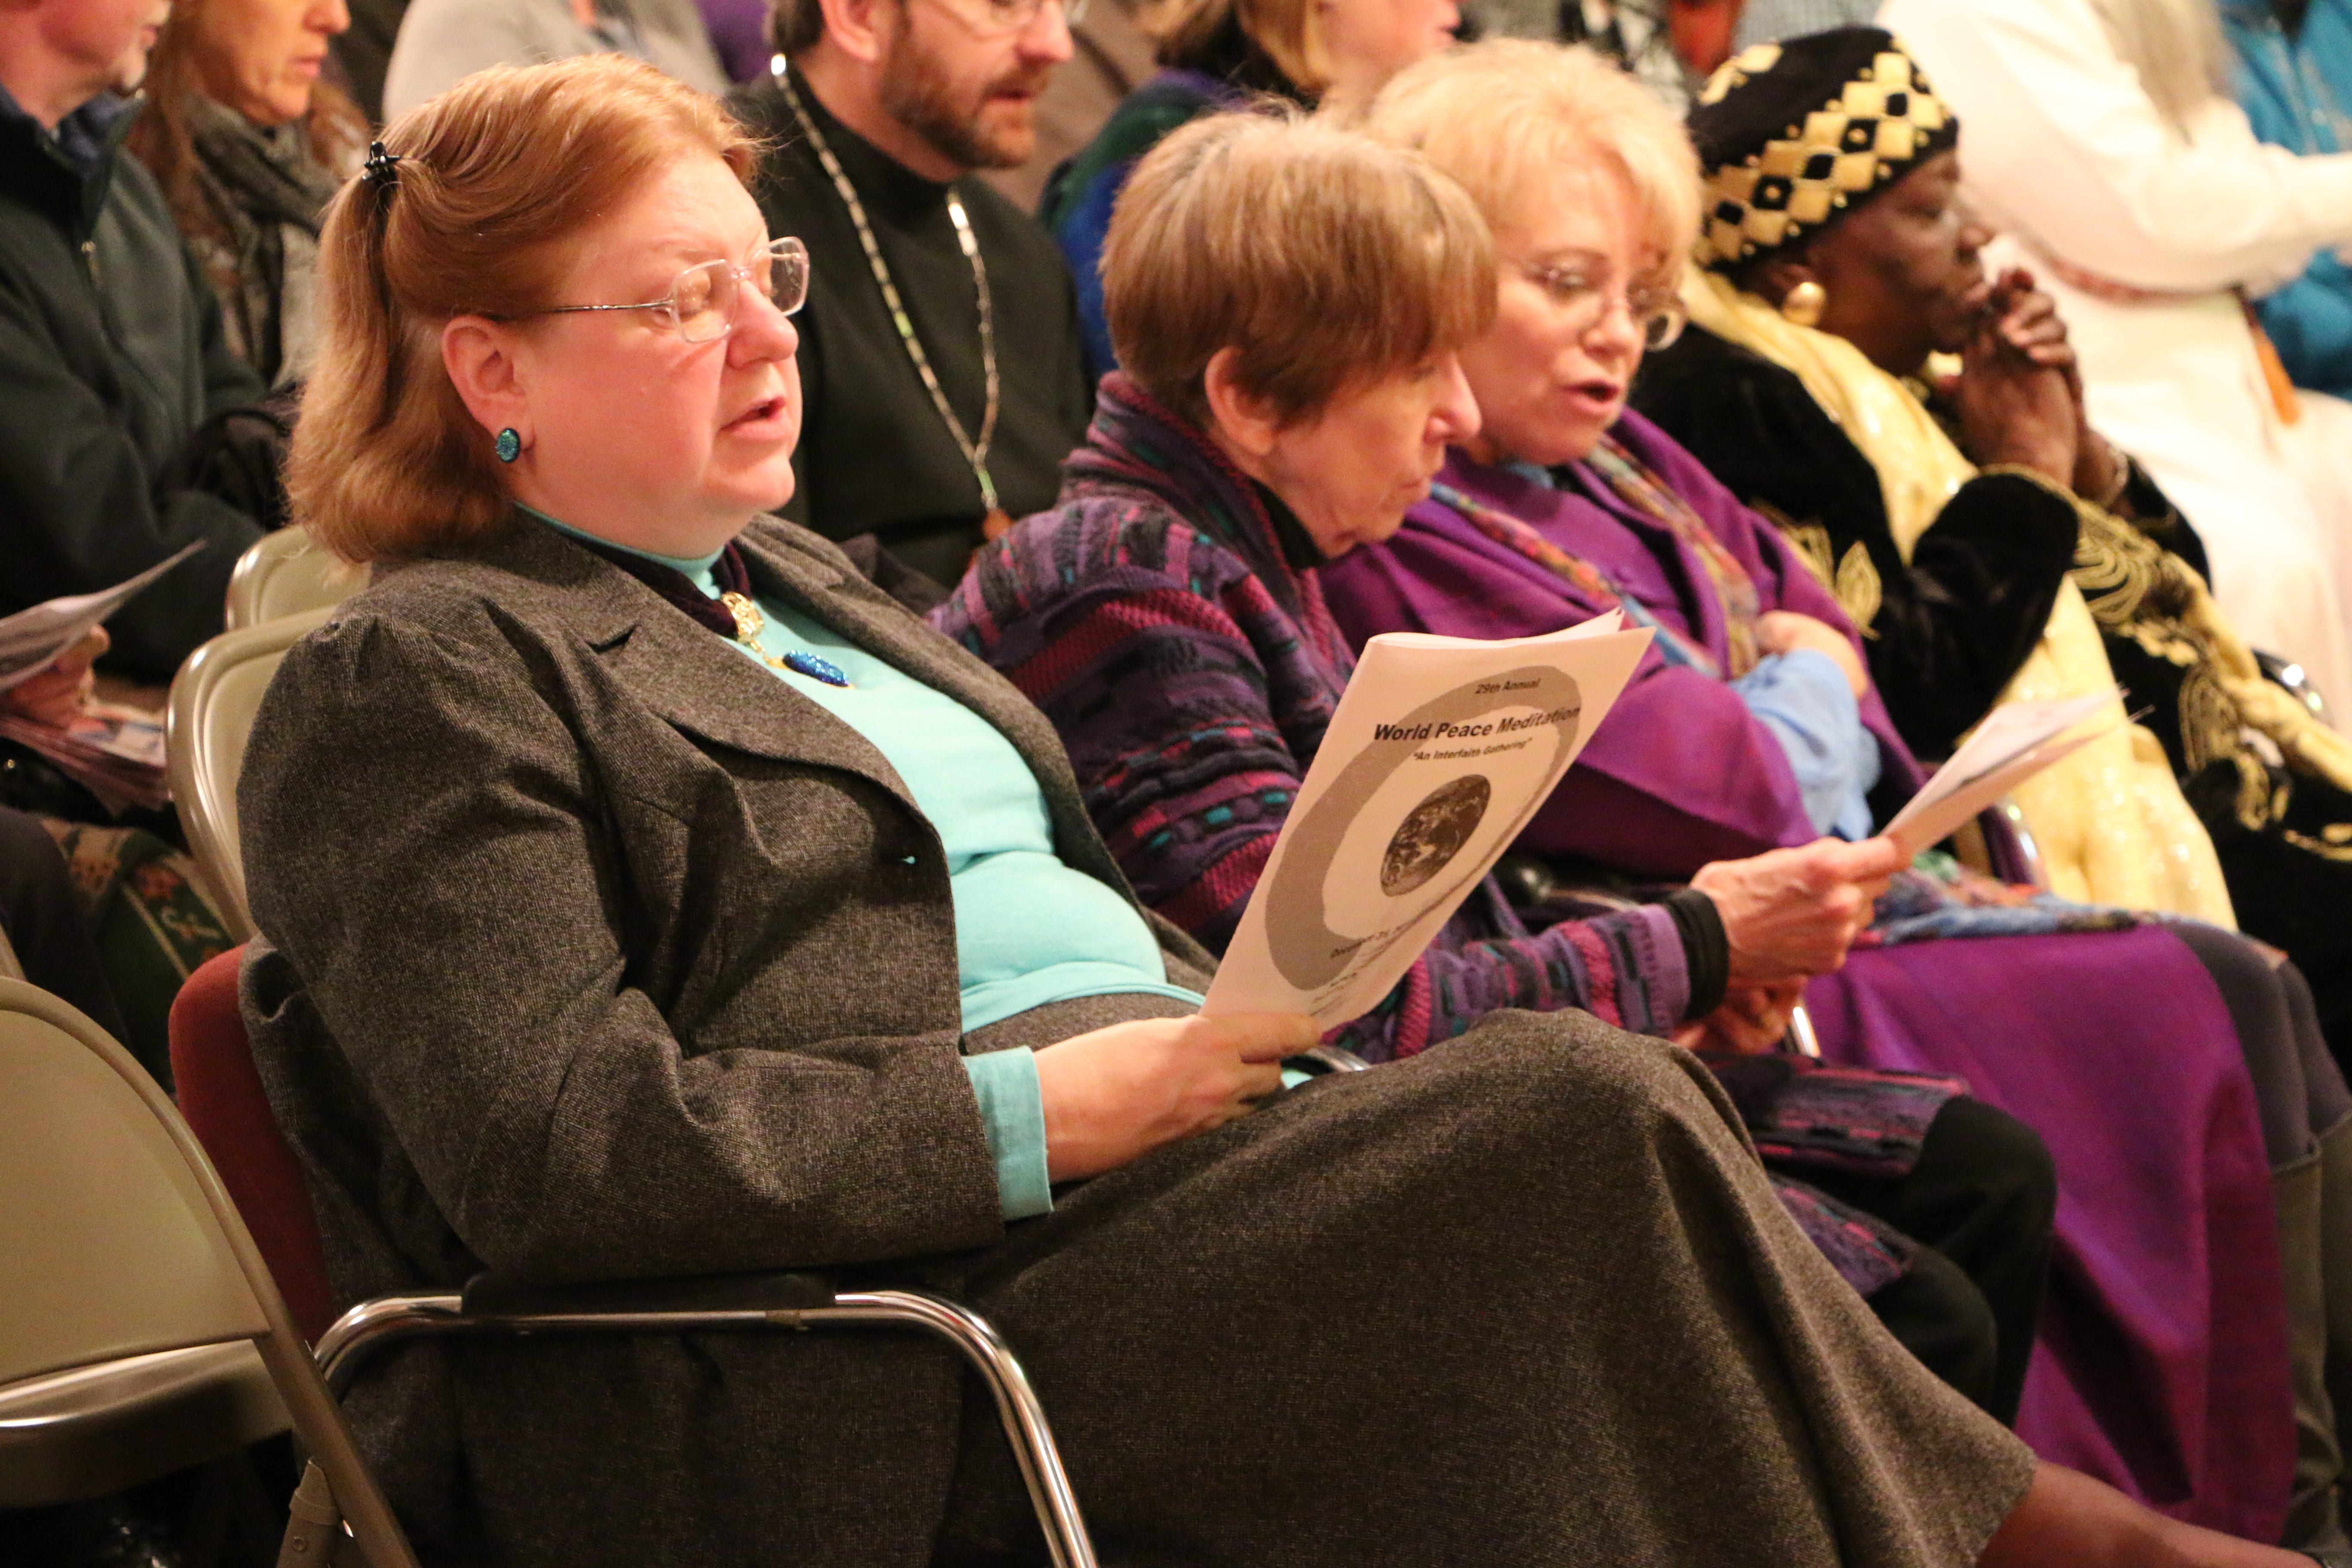 A woman sits, reading the back of the program